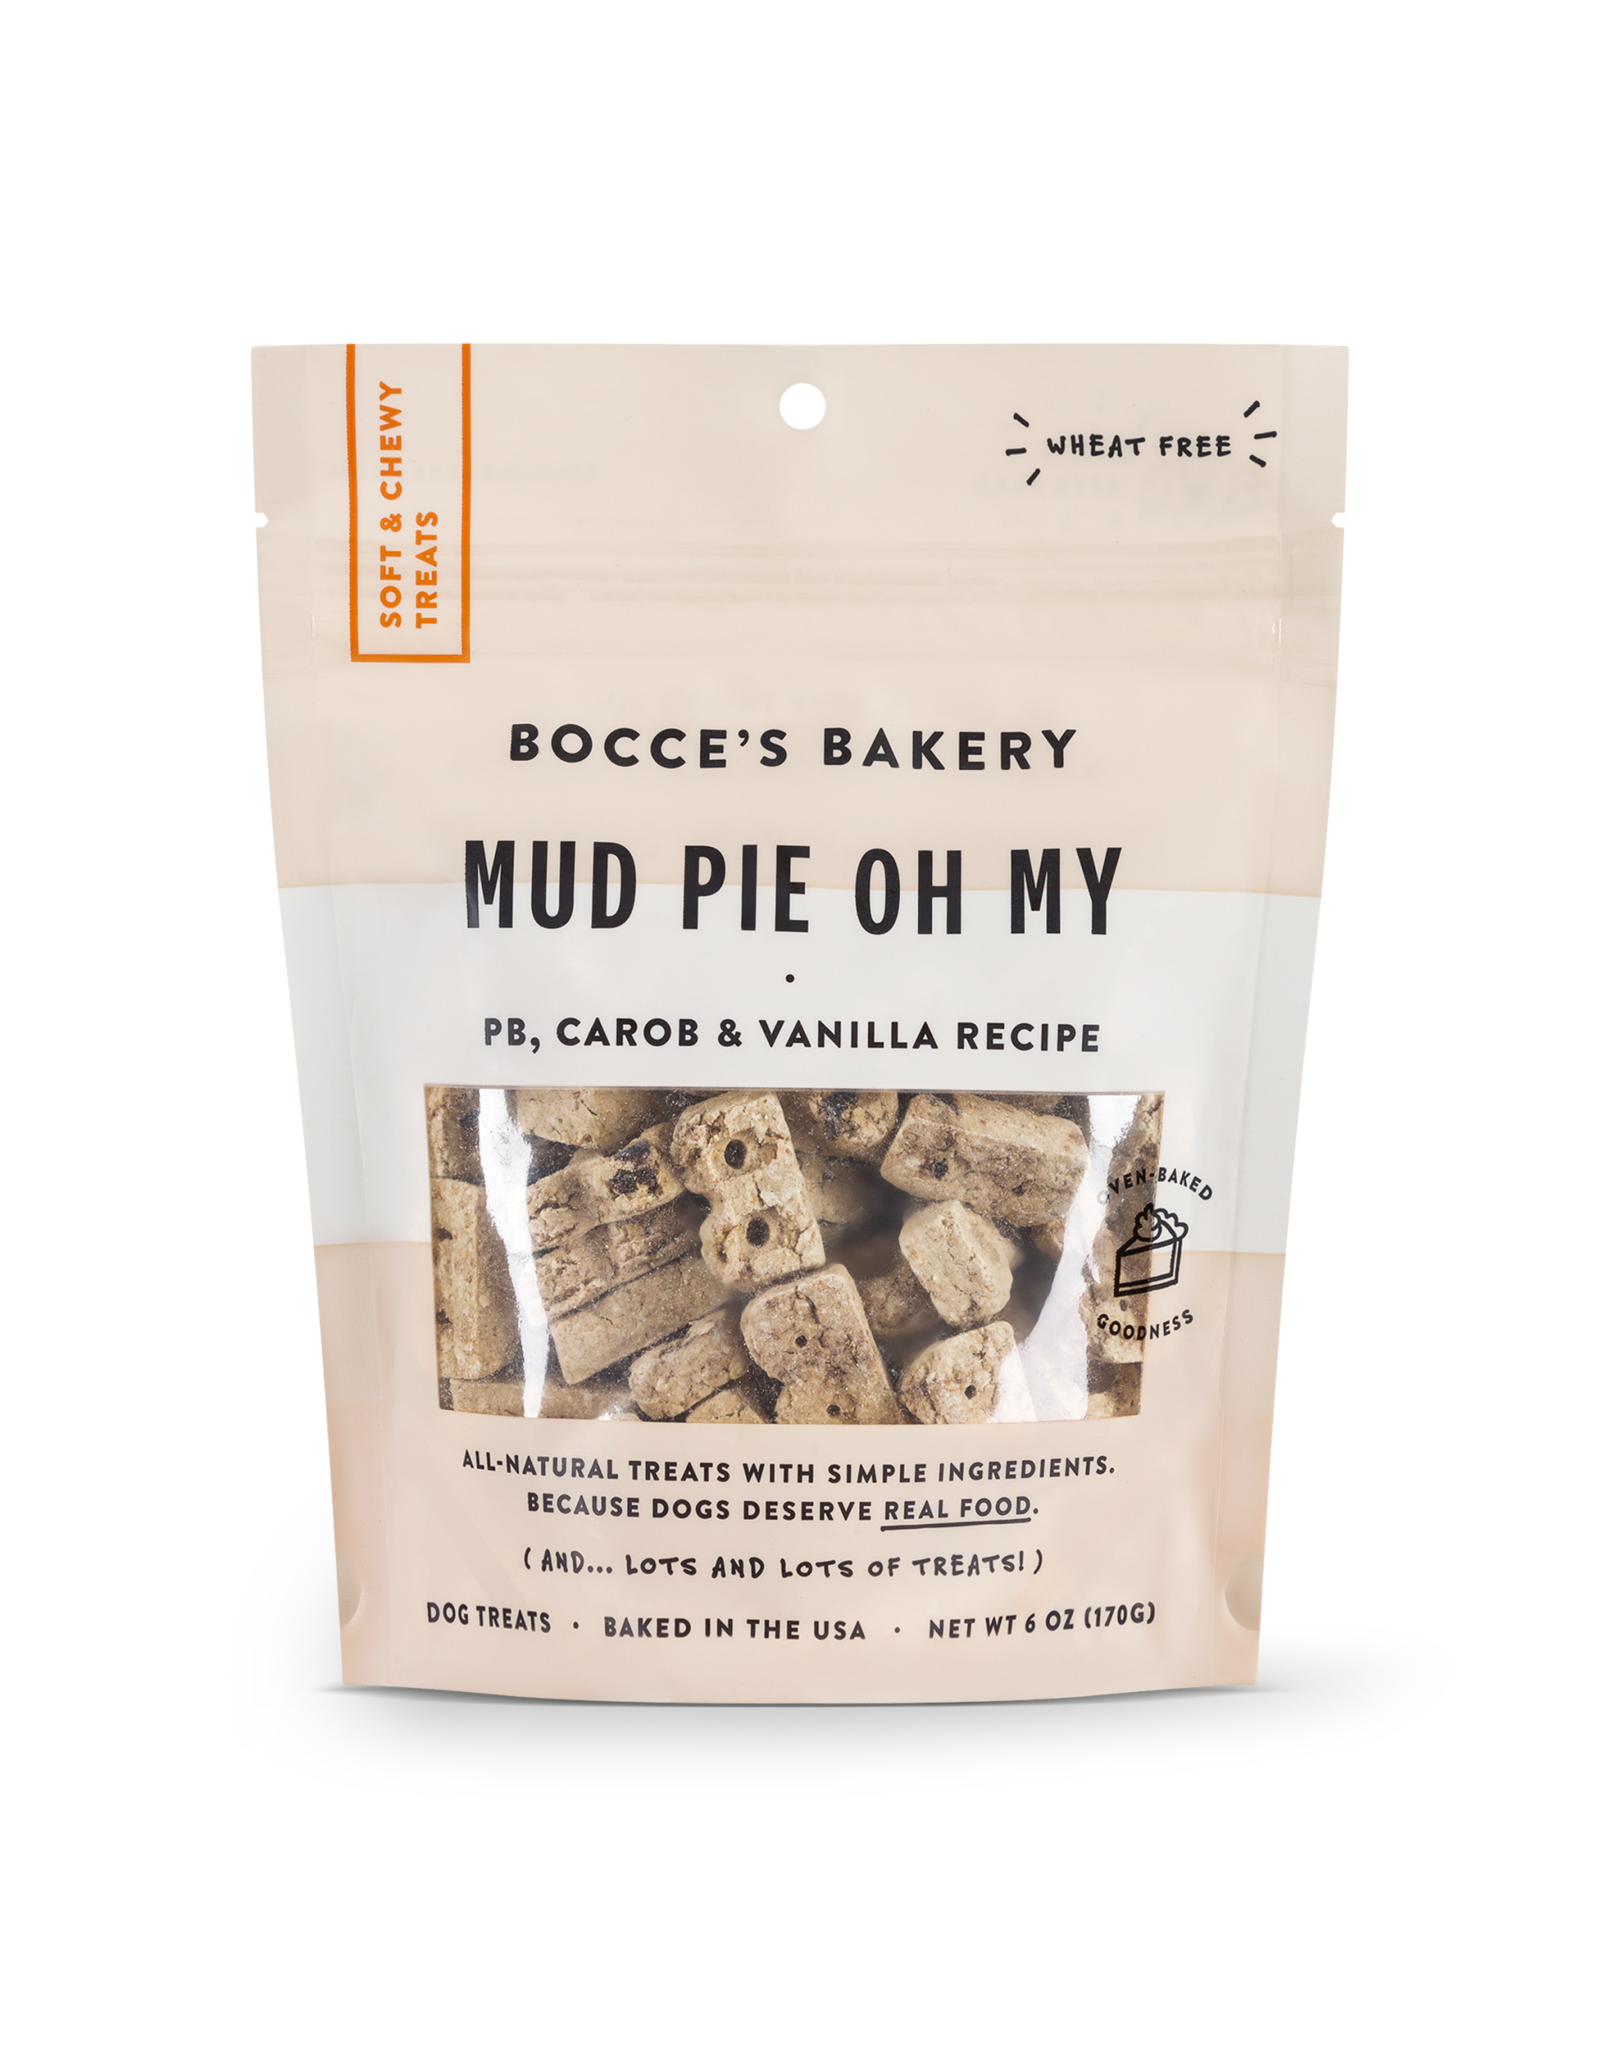 Bocce's Bakery Bocce's Bakery: Soft & Chewy Mud Pie Oh My, 6 oz